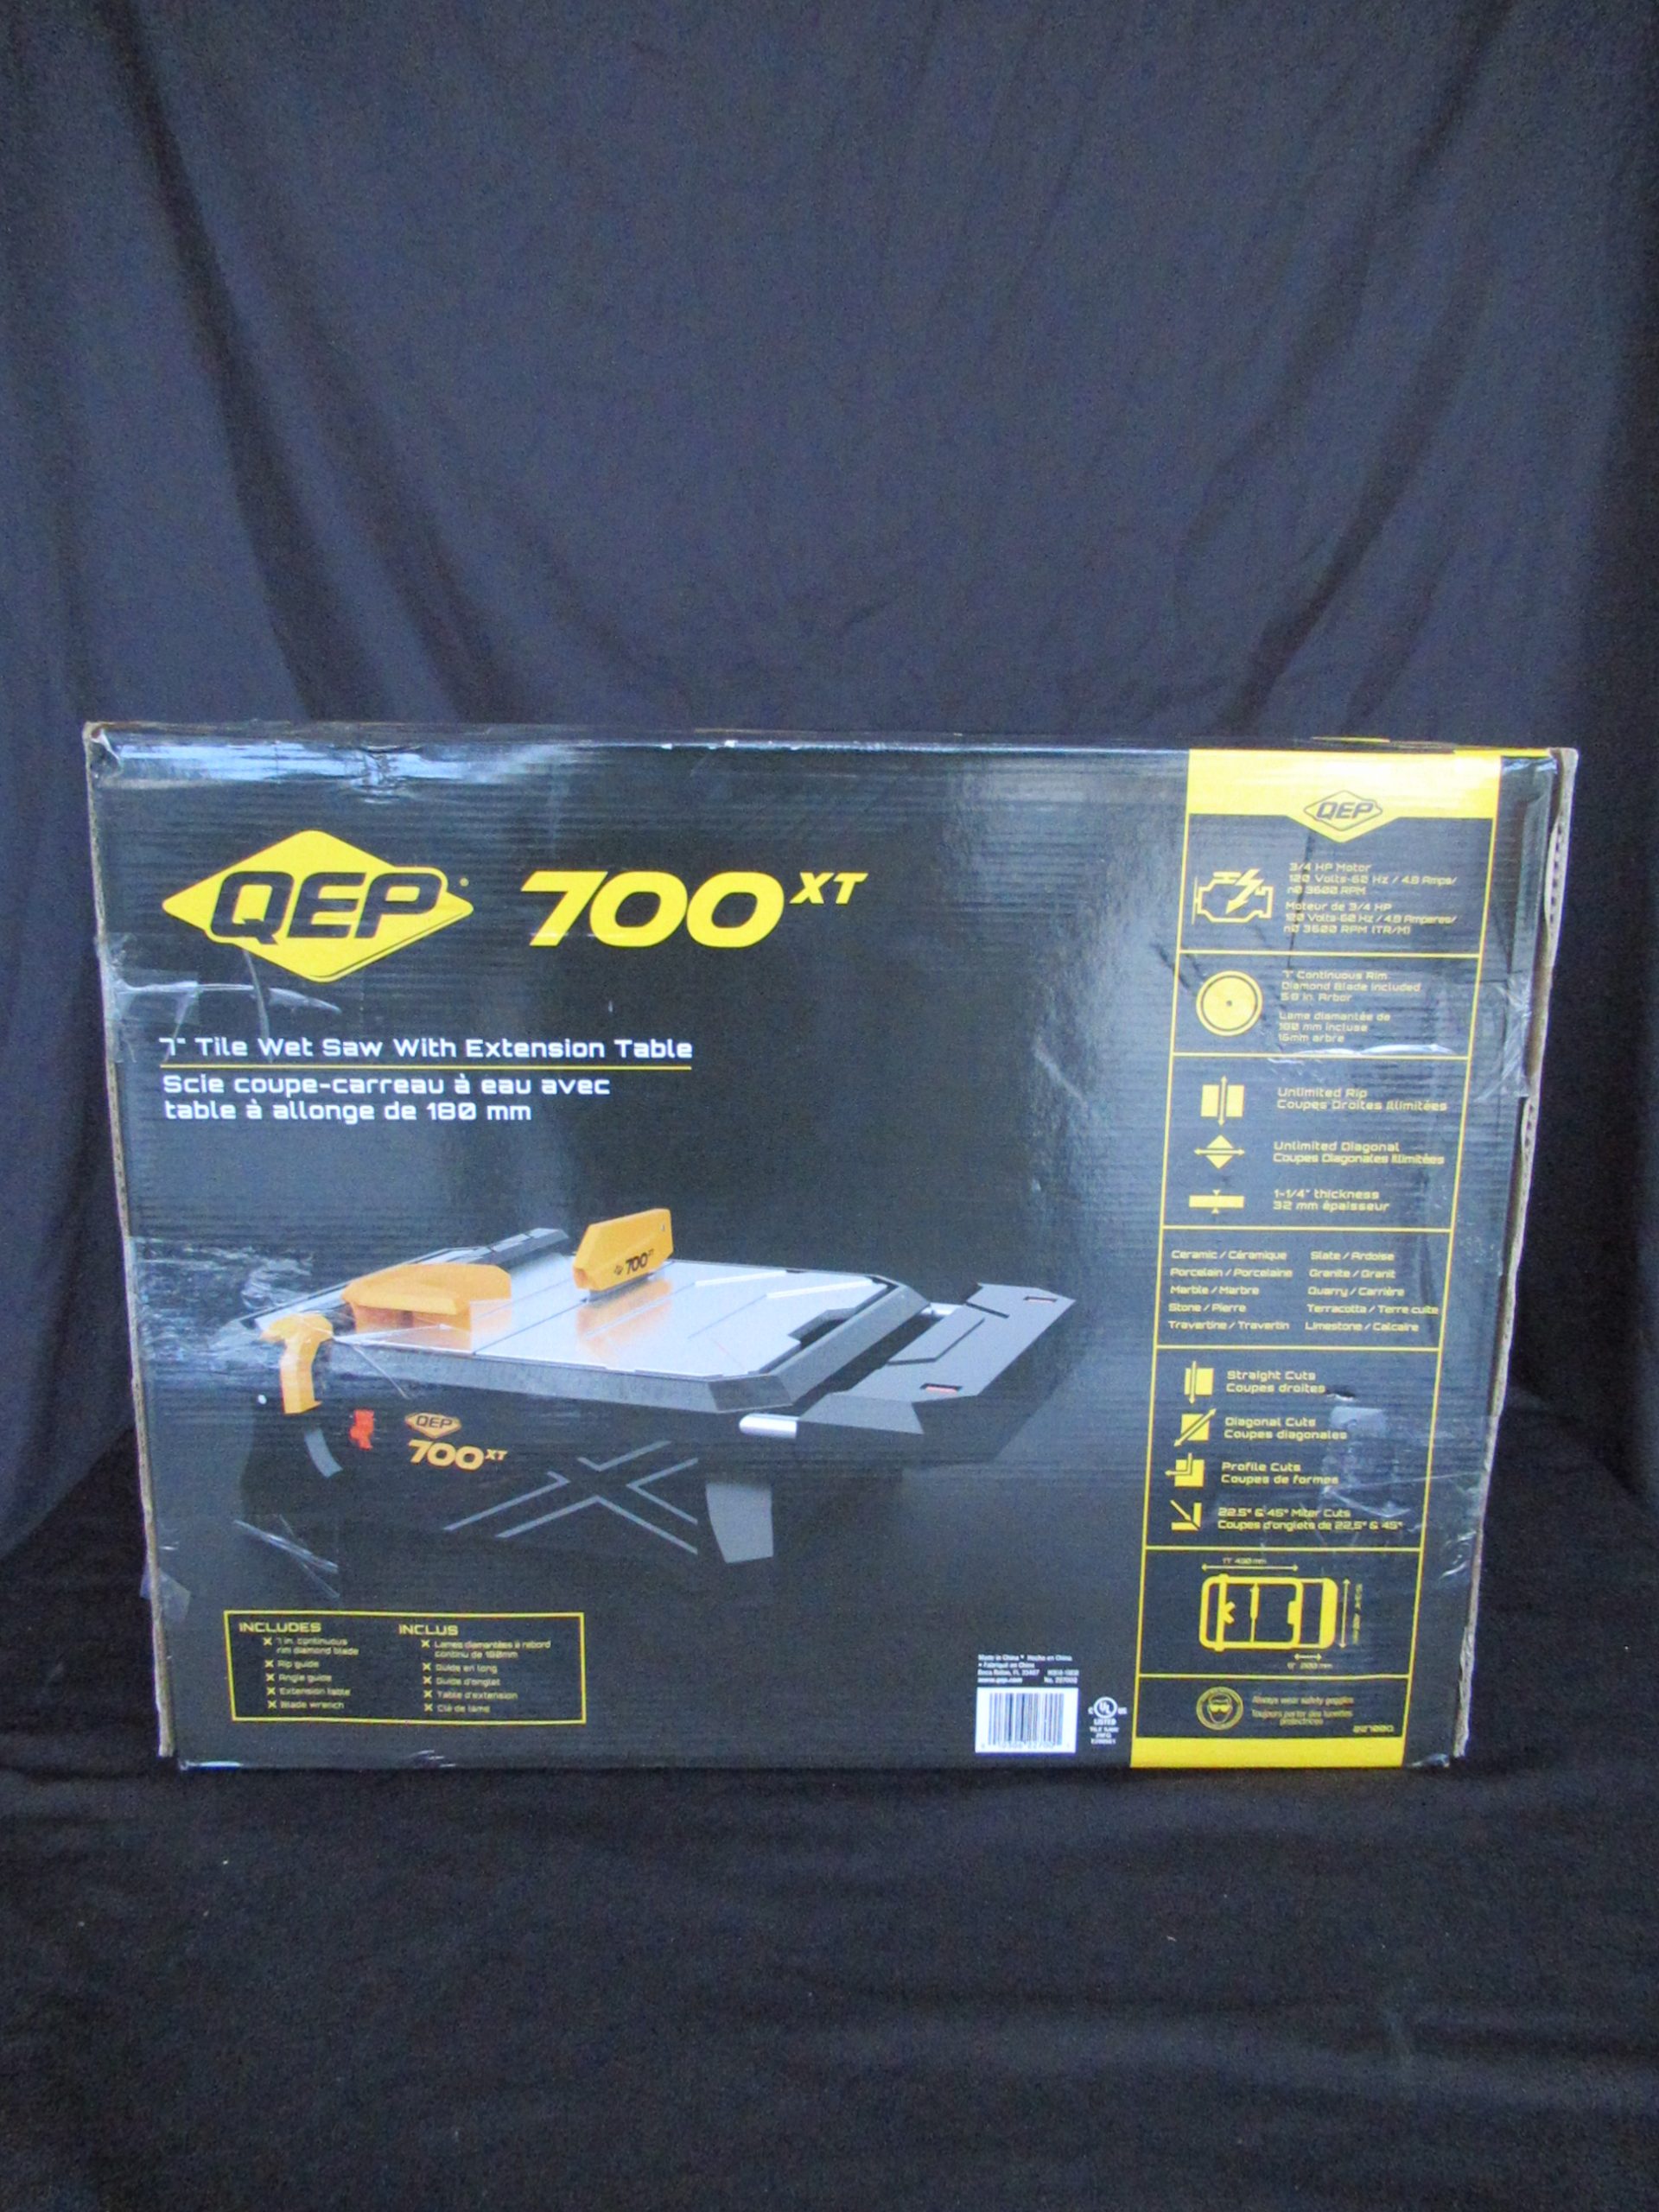 QEP 700XT 3/4 HP Wet Tile Saw with 7 in. Blade and Table Extension